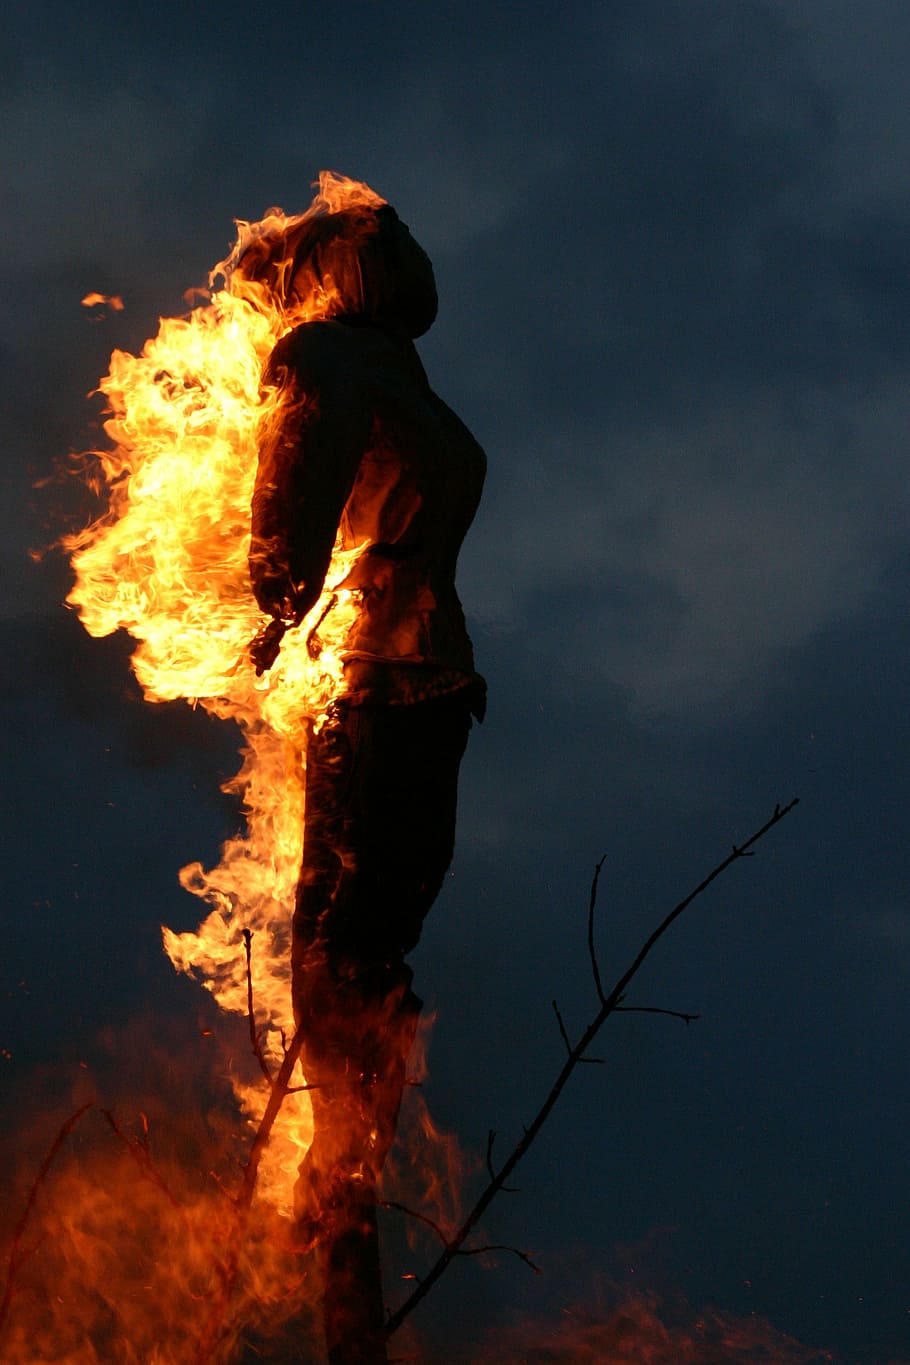 doll, easter fire, summer village, burning, flame, heat - temperature, fire, fire - natural phenomenon, nature, sky